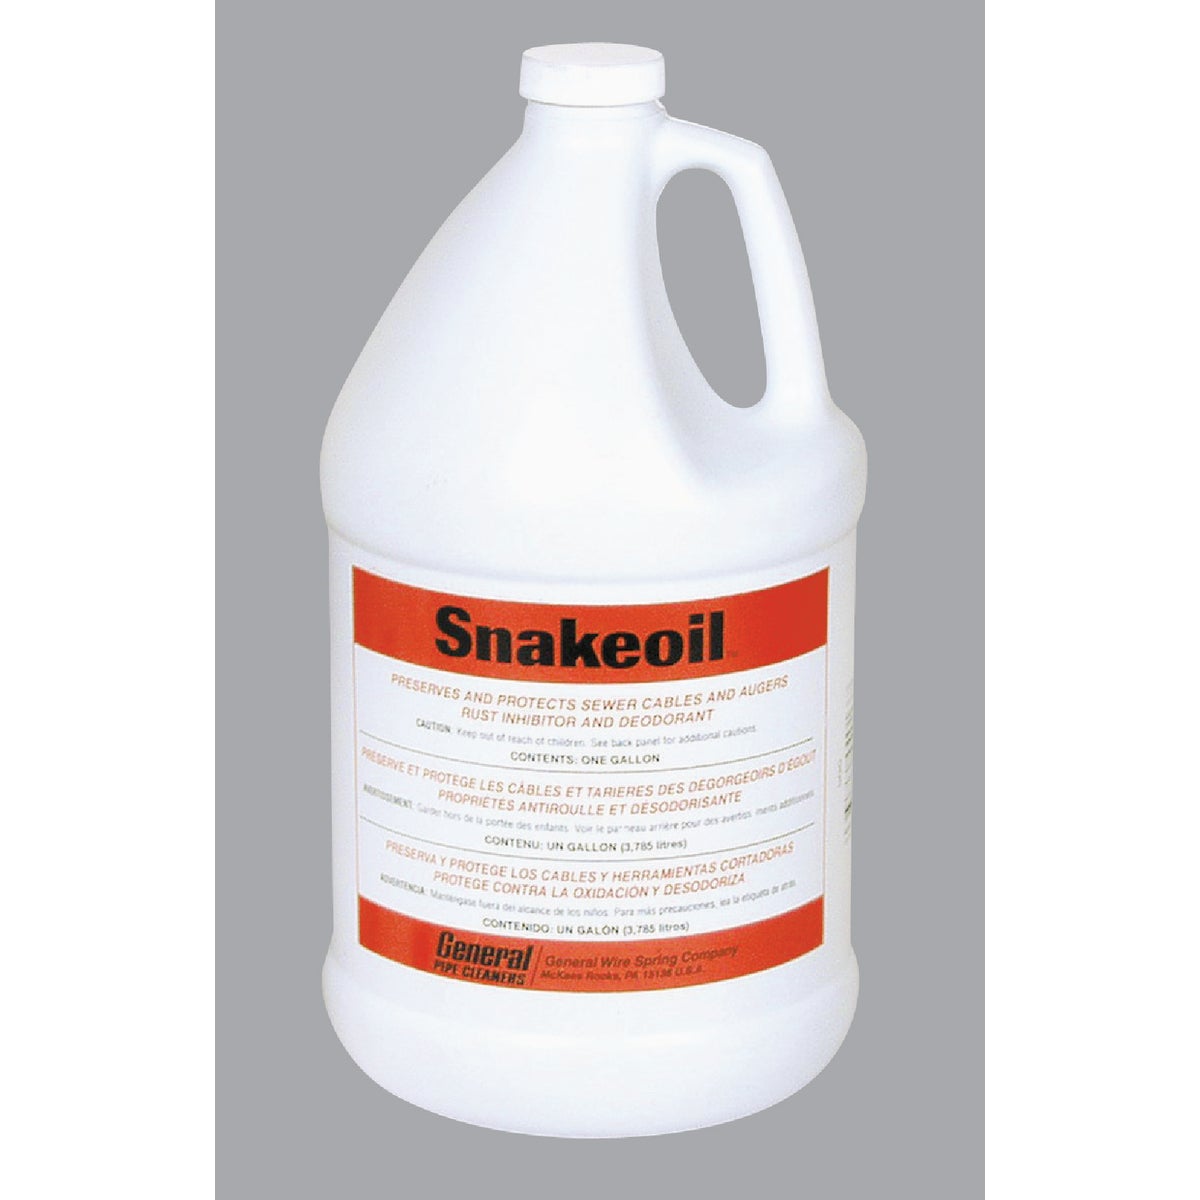 Item 400343, Snake oil is manufactured specifically for the purpose of protecting drain 